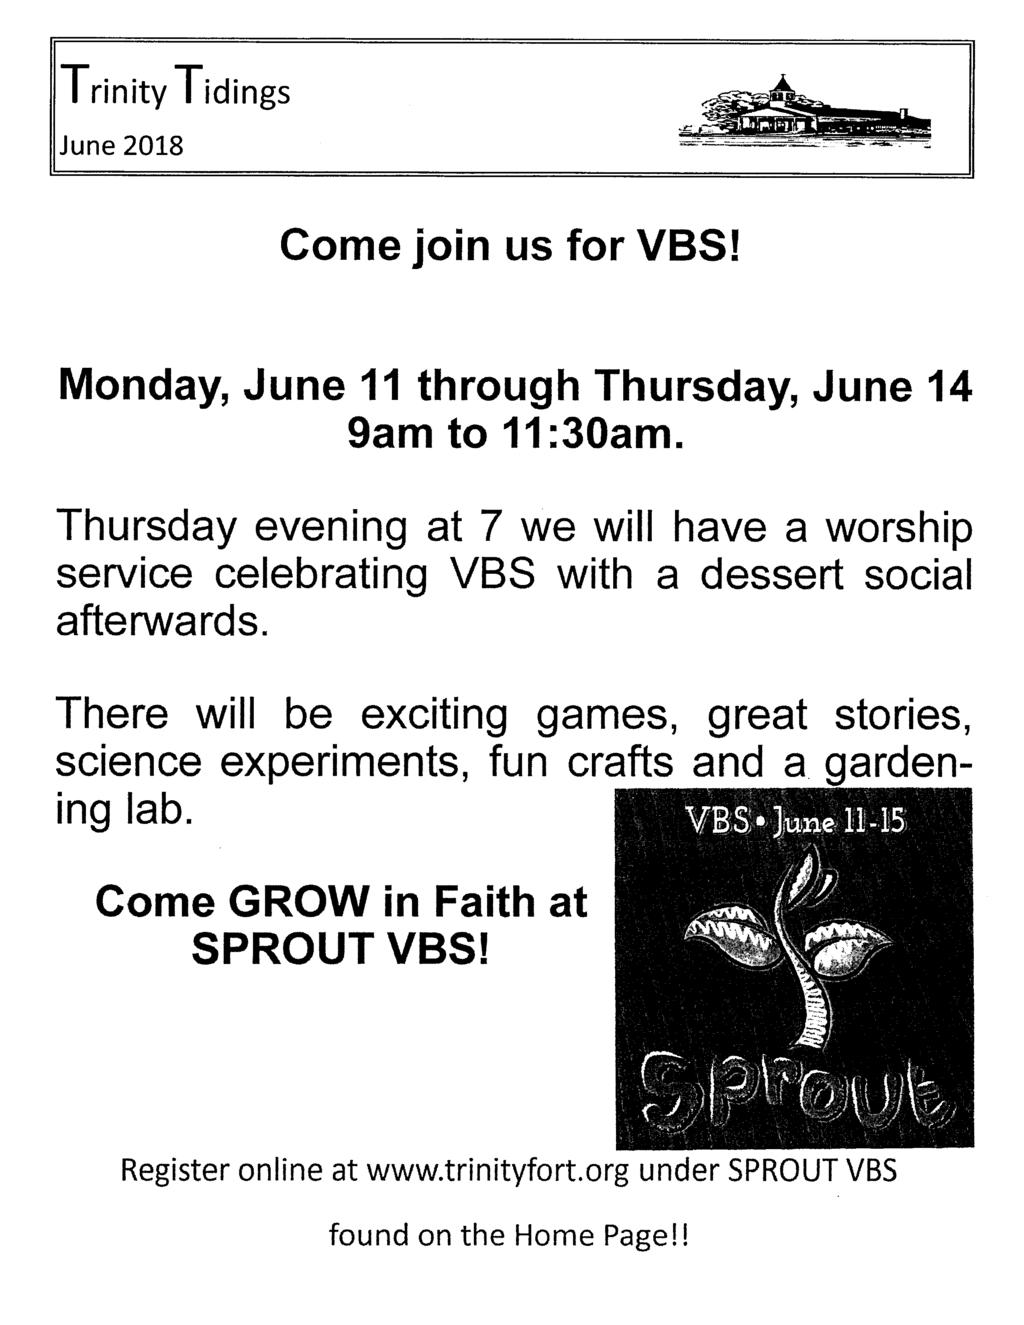 Trinity Tidings June 2018 Come join us for VBS! Monday, June 11 through Thursday, June 14 9am to 11:30am.